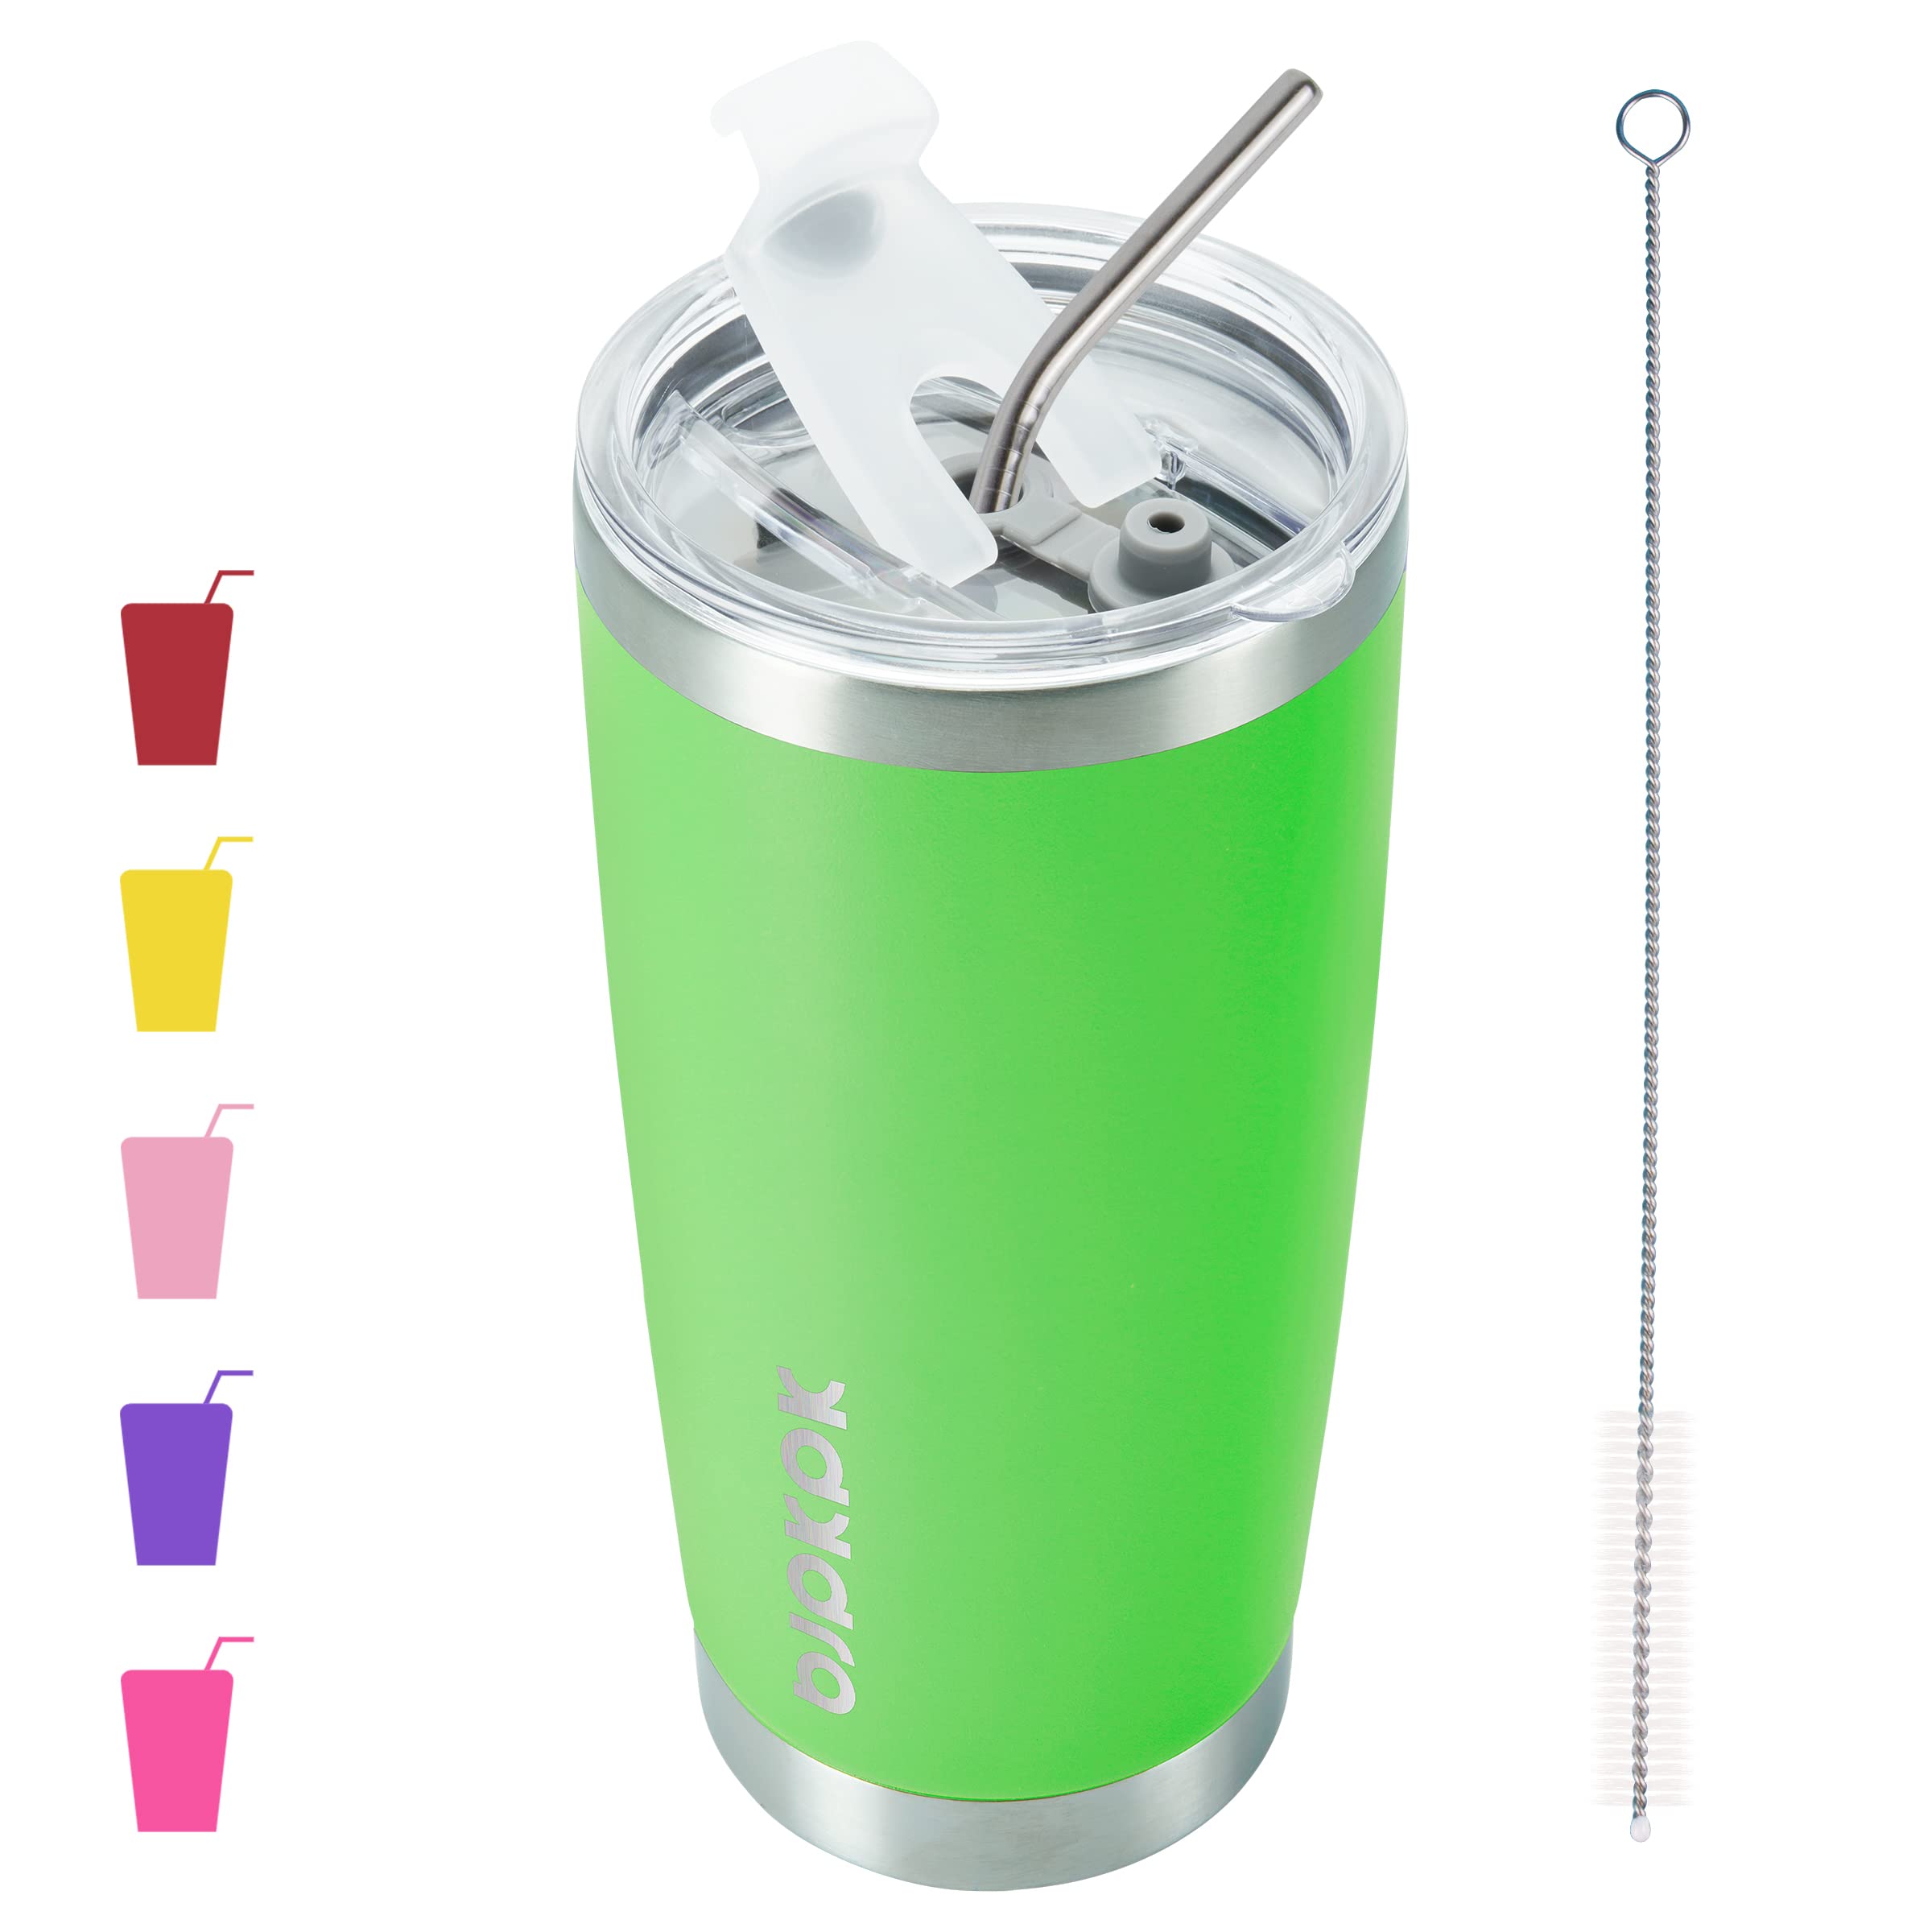 20-Oz BJPKPK Insulated Stainless Steel Coffee Tumbler With Lid And Straw $8.92 + Free Shipping w/ Prime or $25+